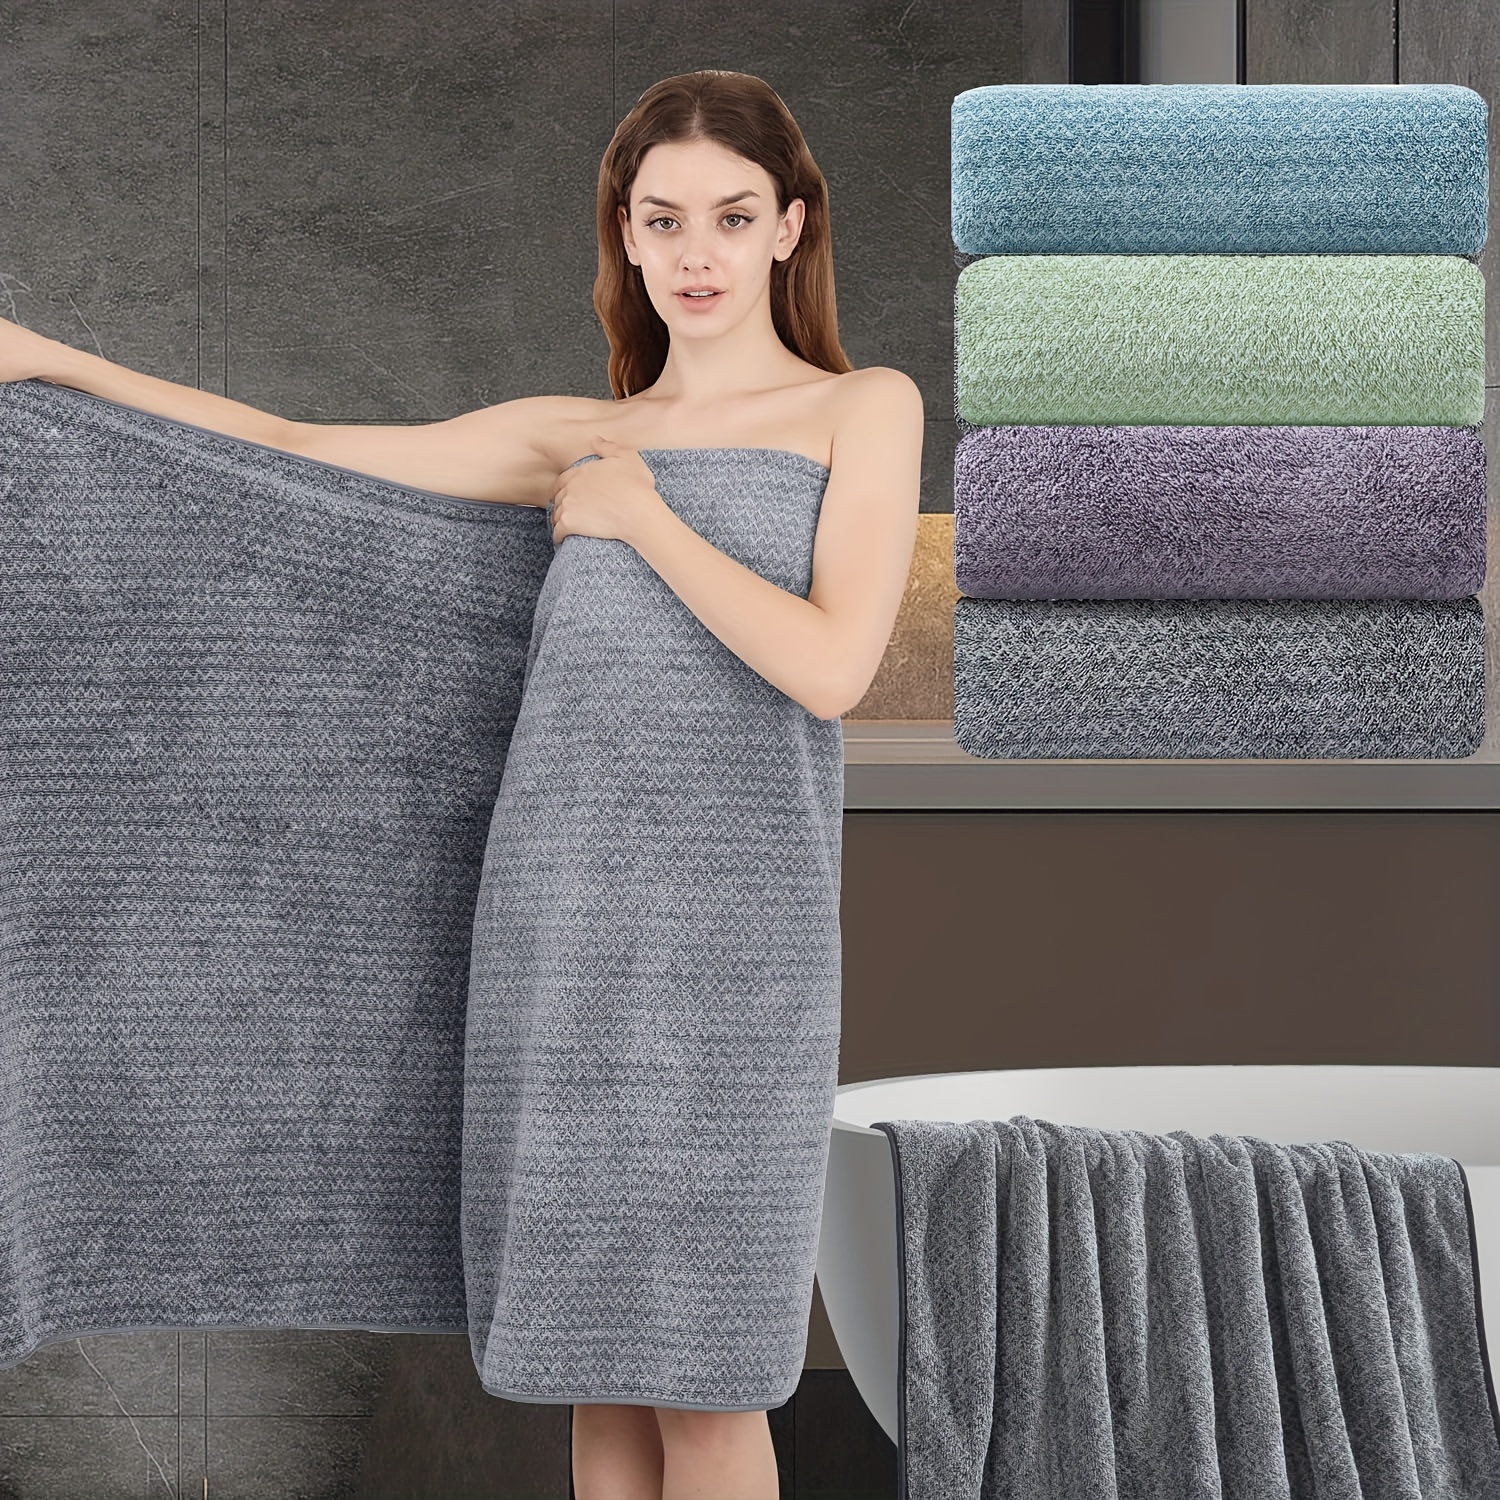 

Large Bath Towels Extra Large Bathroom Towels Bath Sheets Towels For Adults, Quick Dry Towel Super Soft Absorbent Oversized Towels Microfiber Shower Towels For Spa Gym